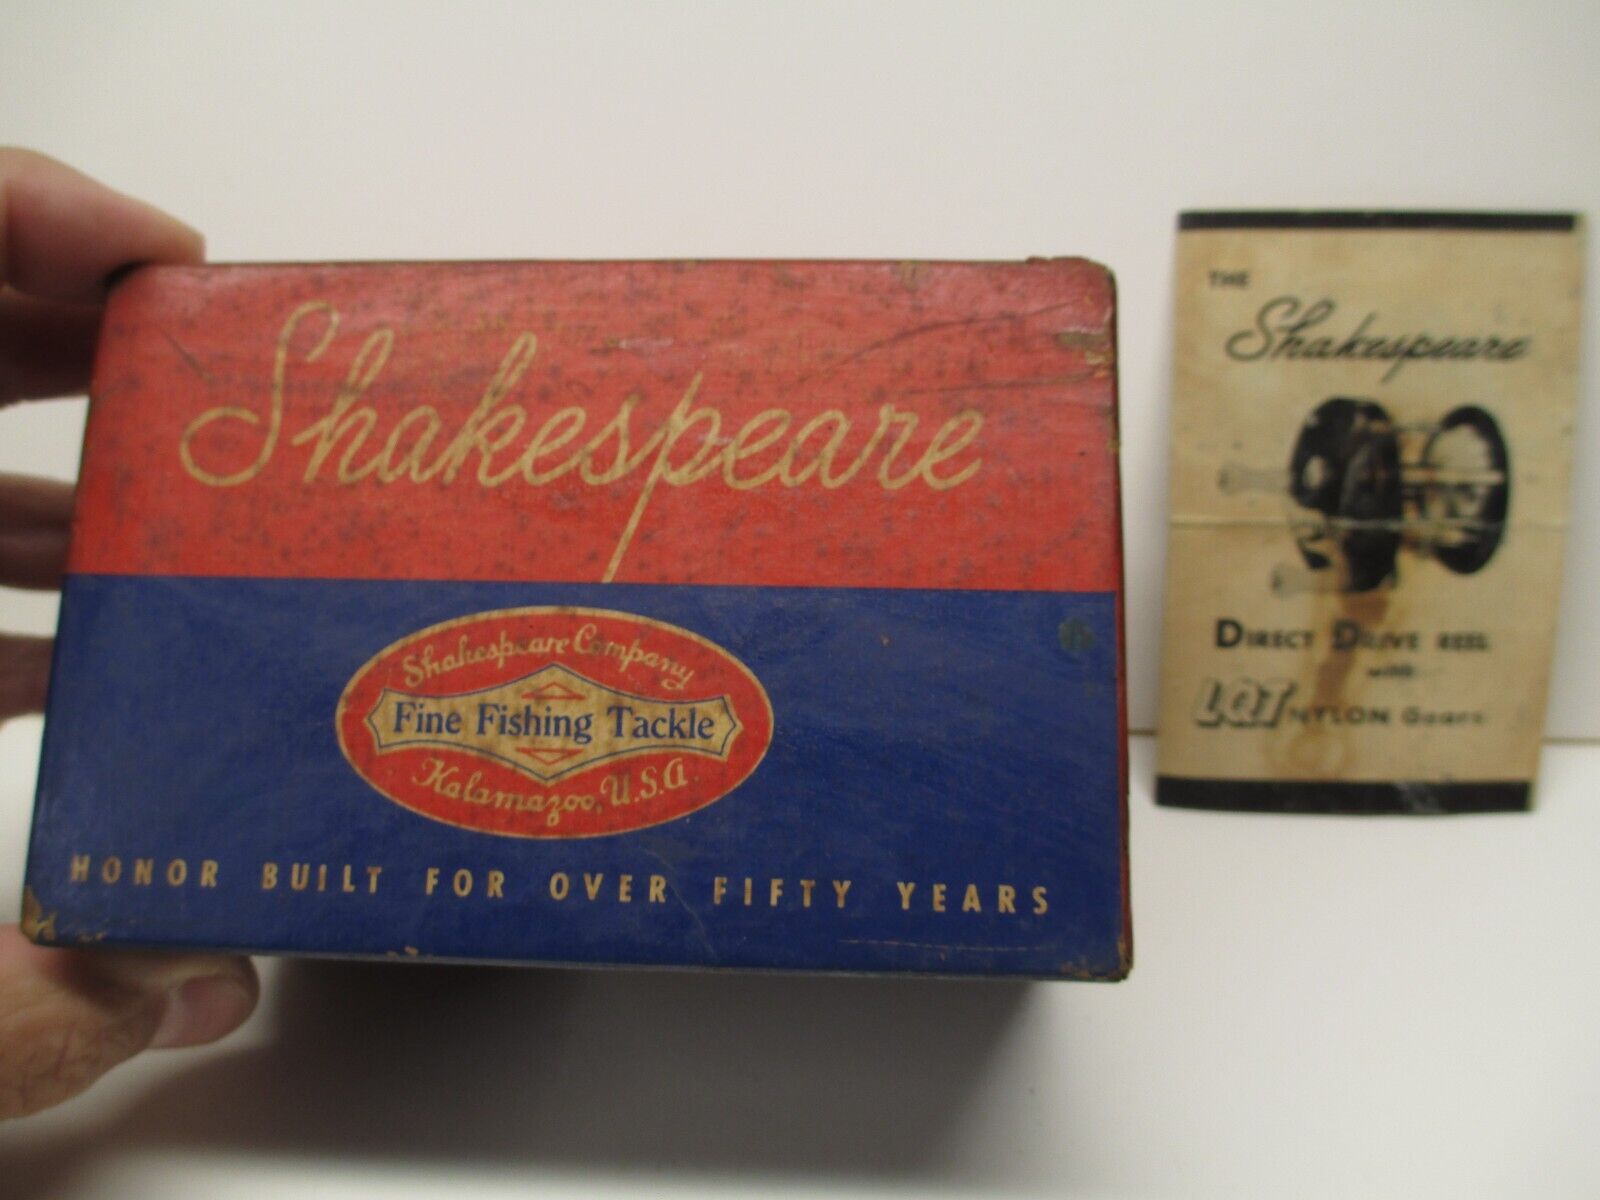 Shakespeare 1973D Direct Drive Fishing Reel Box w/paper No Reel